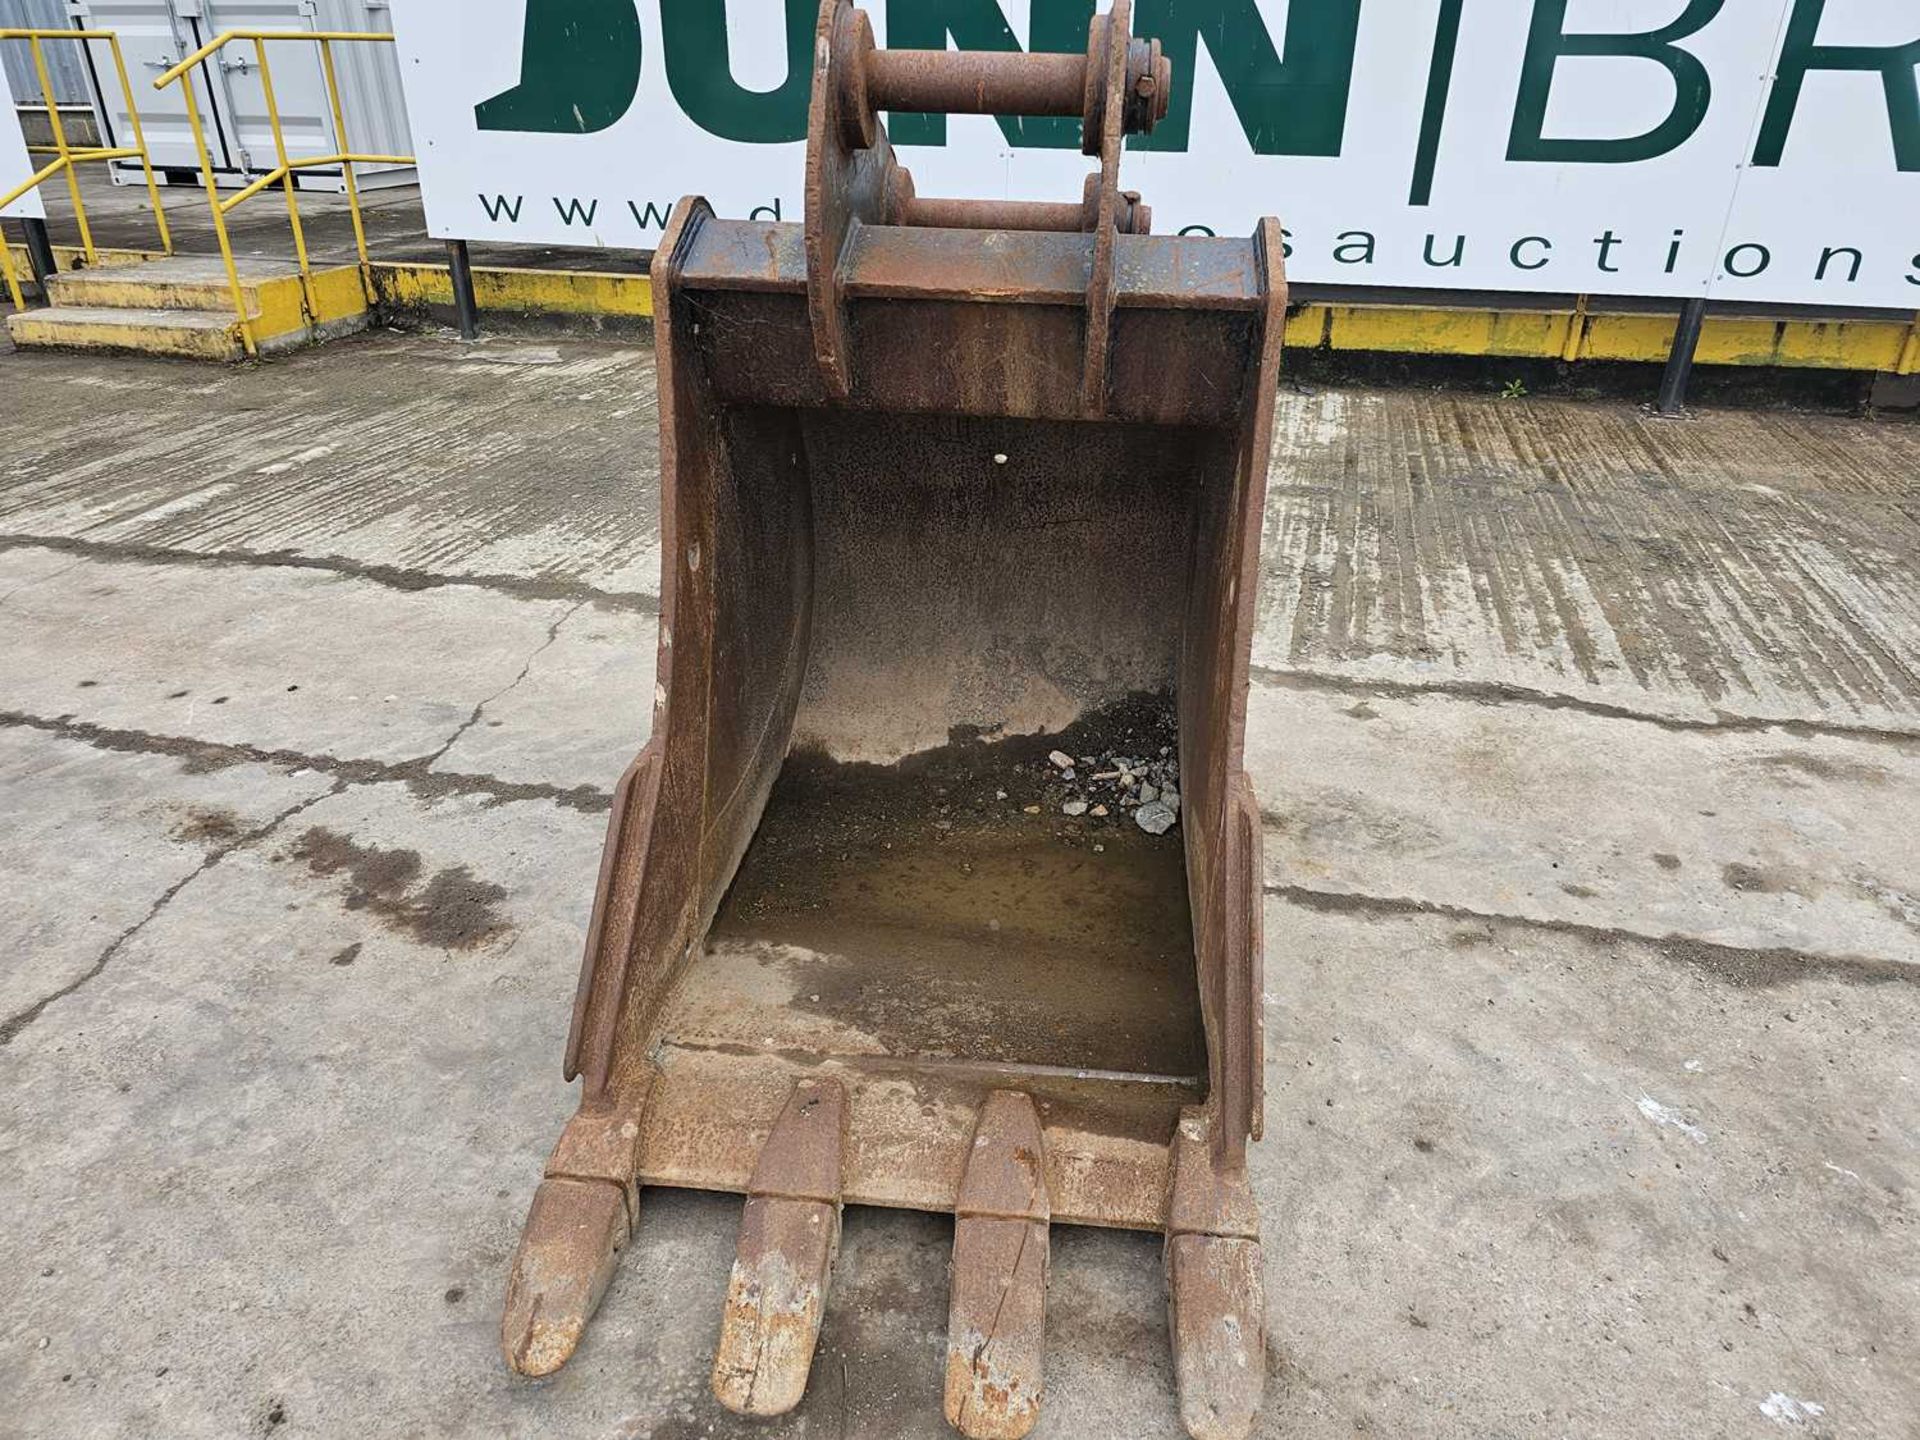 Geith 36" Digging Bucket 80mm Pin to suit 20 Ton Excavator - Image 5 of 6